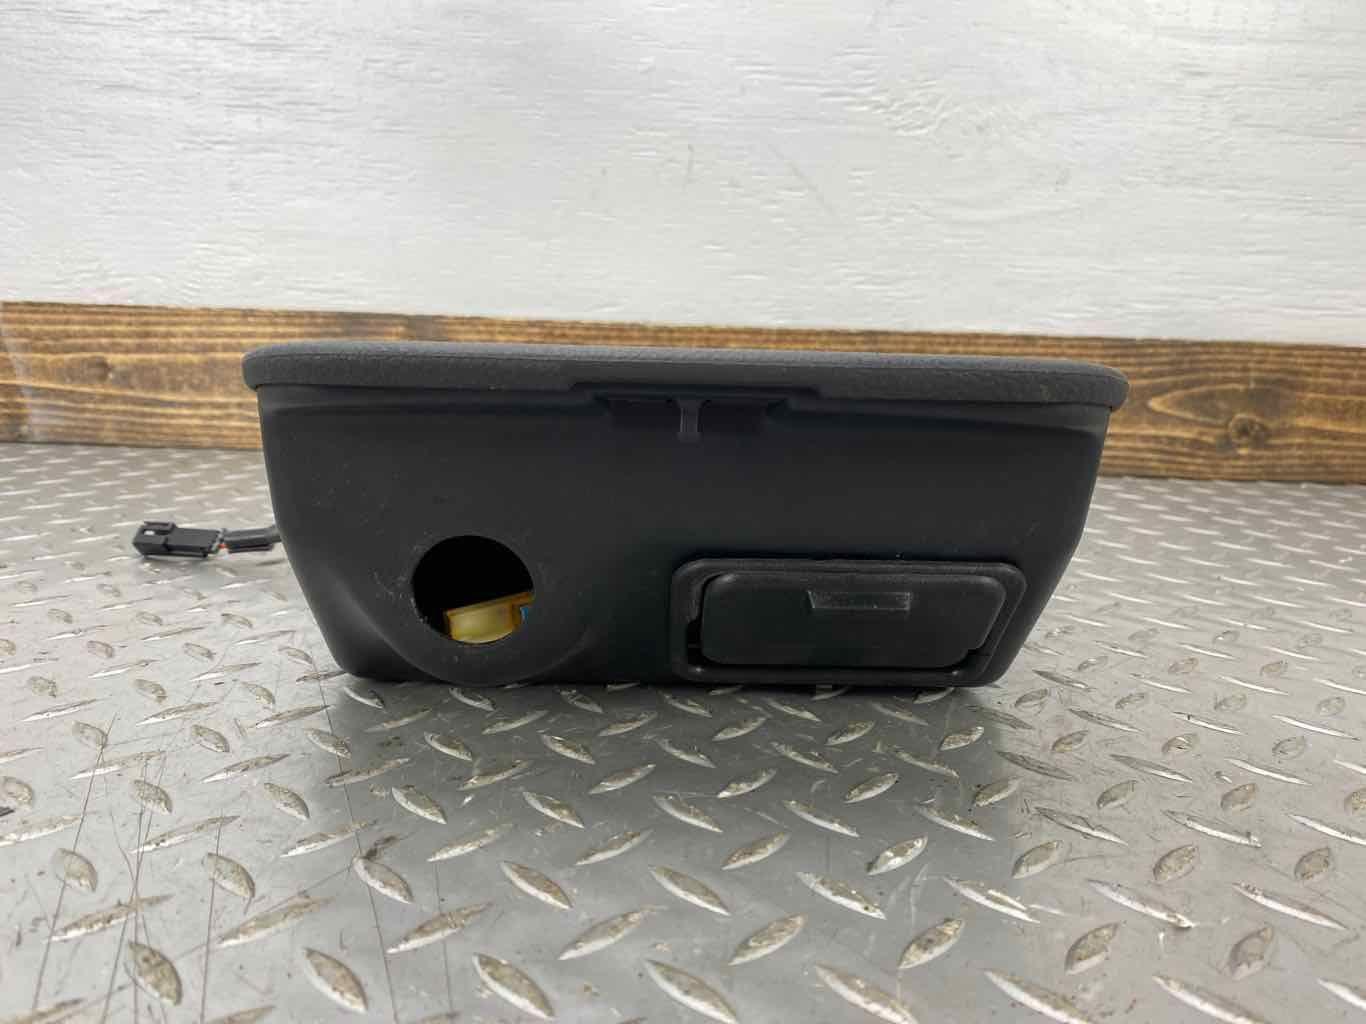 03-06 Chevy SSR Dash Mounted Ash Tray Cubby (Black 19I) NO Lighter